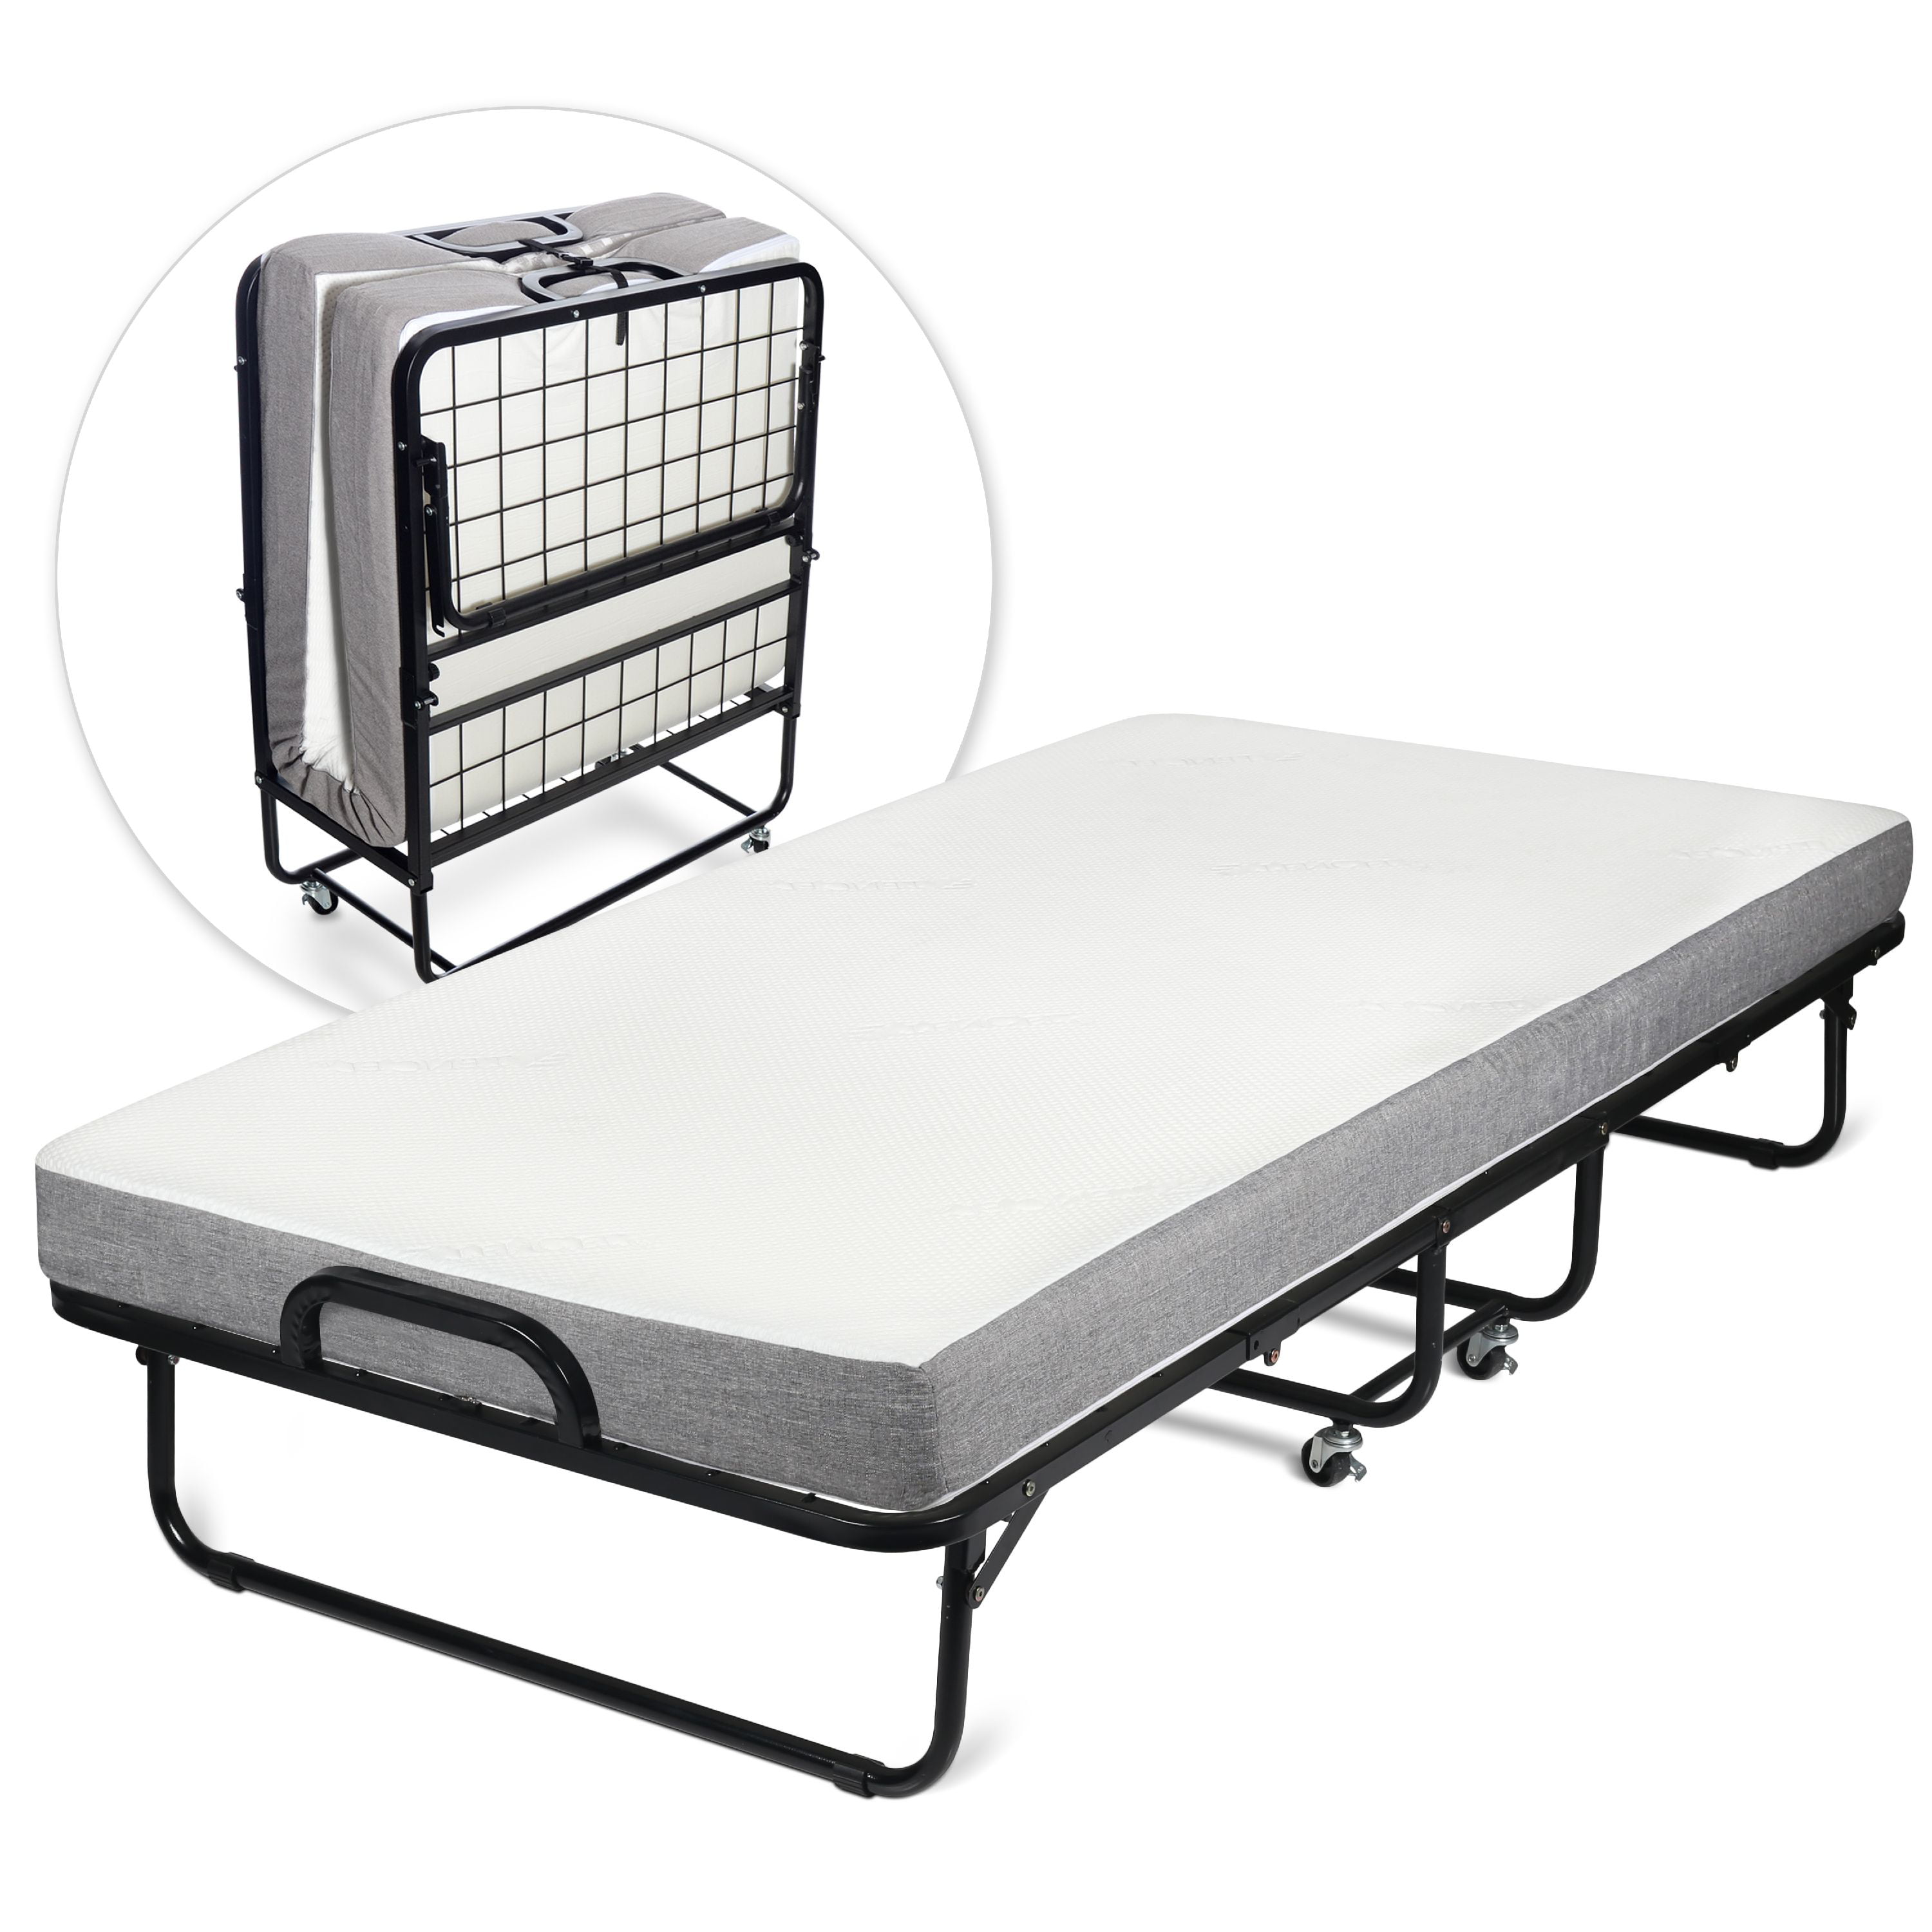 Milliard Diplomat Folding Bed Twin Size with Luxurious Memory Foam Mattress and a Super